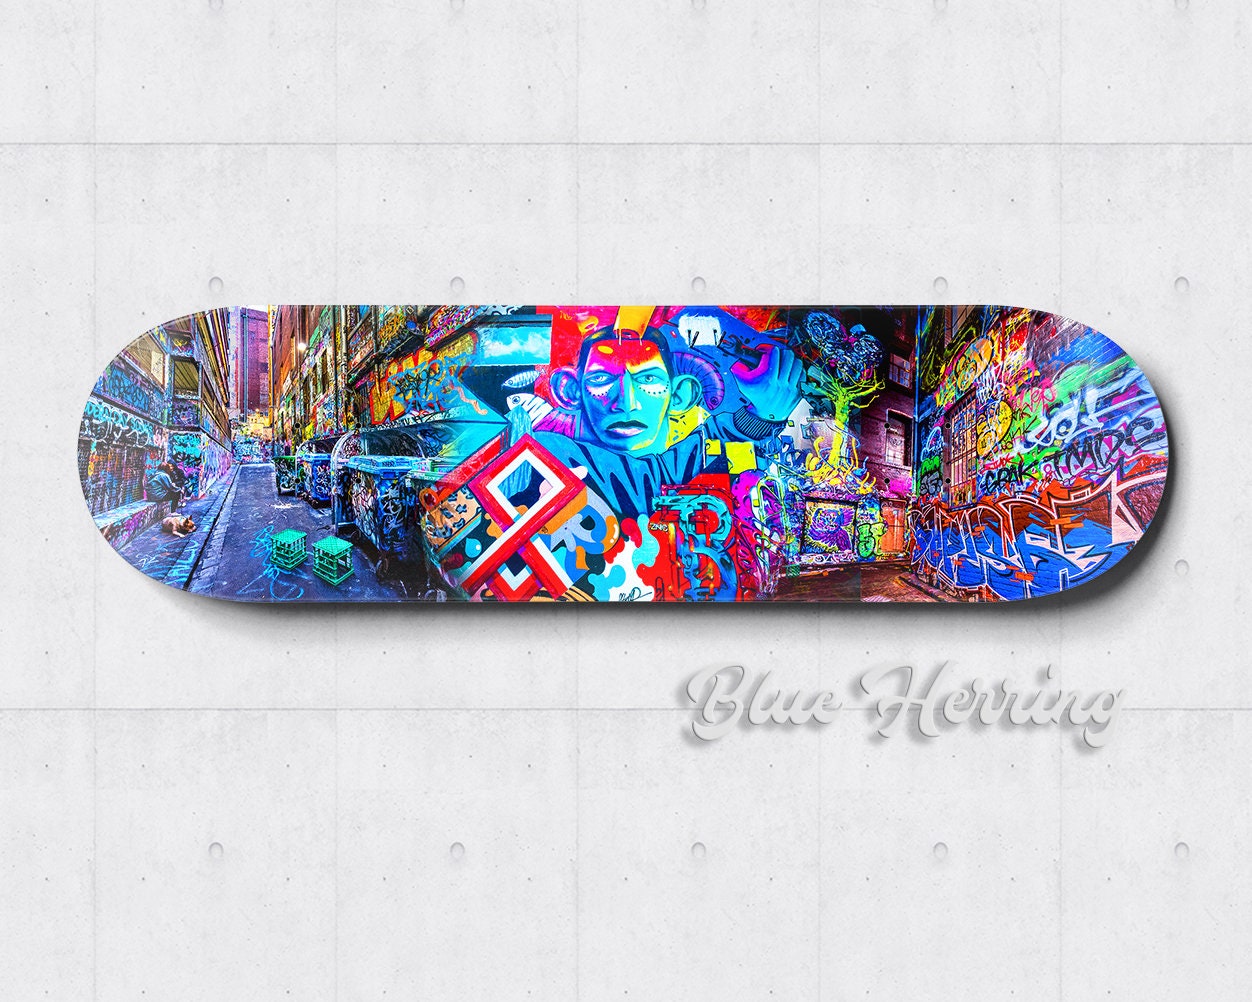 Skateboard Deck Wall Art - The New Trend – Boards on the Wall